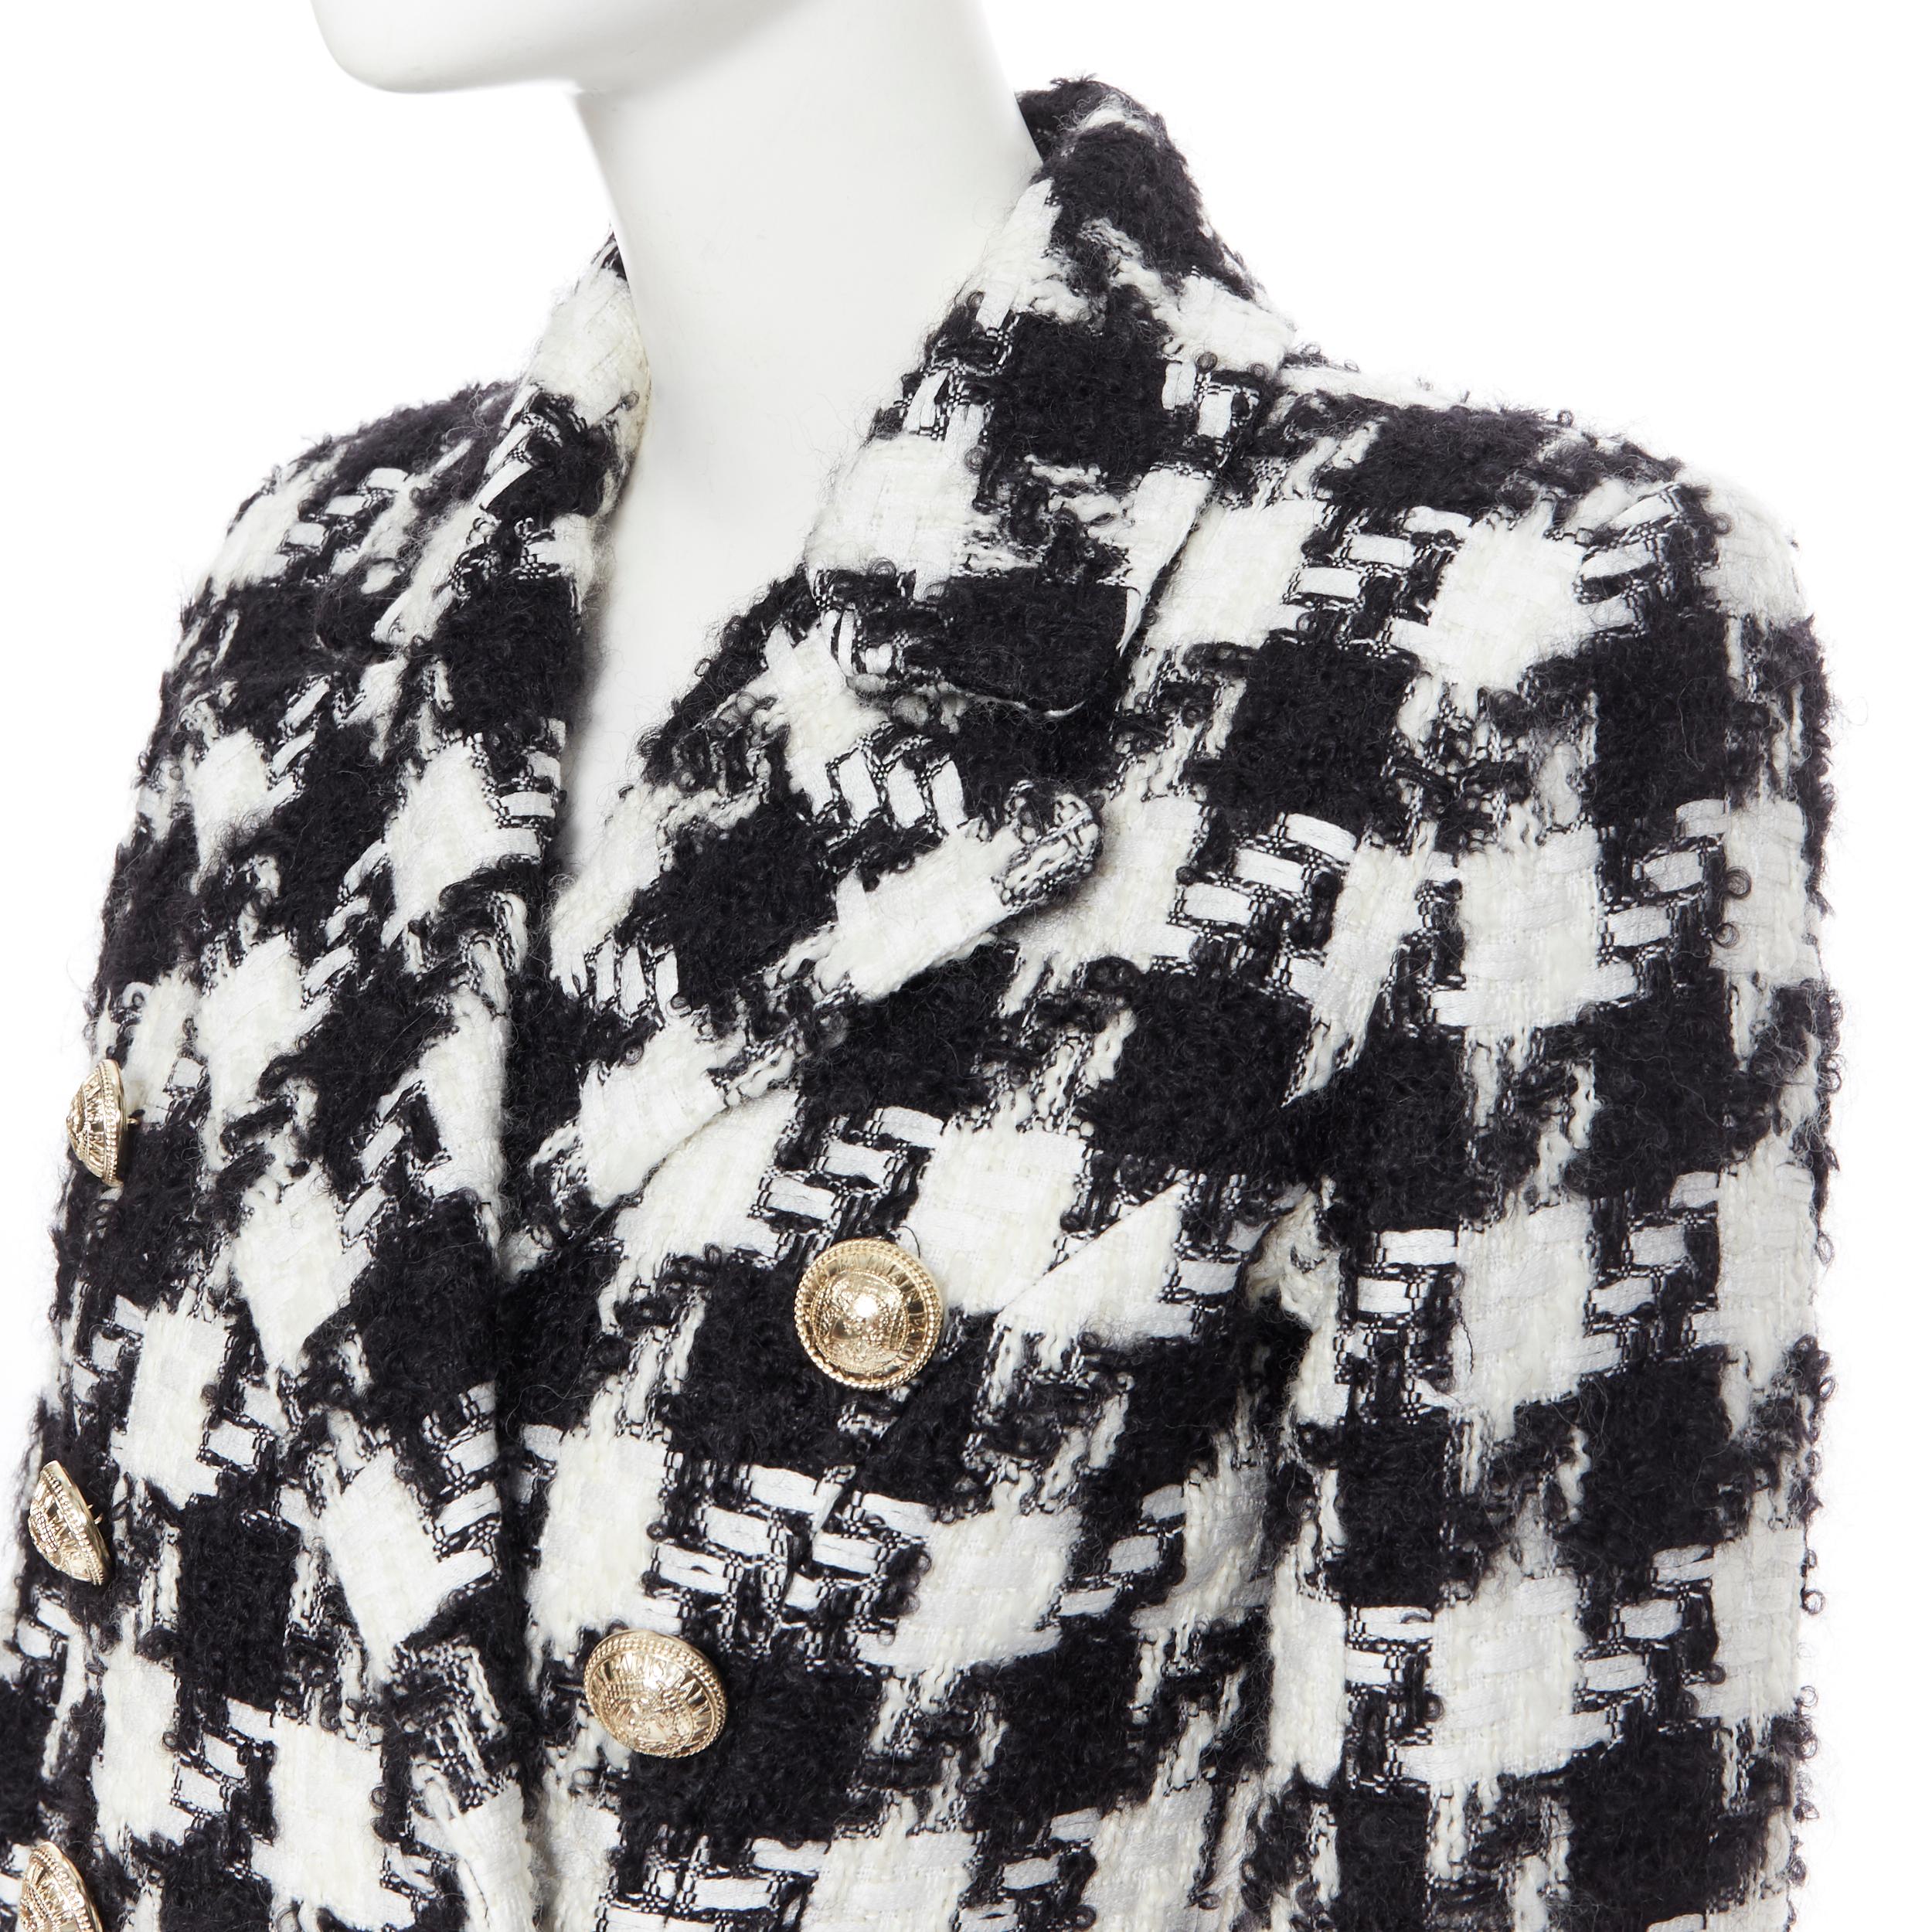 new BALMAIN houndstooth black white tweed double breasted military coat FR34 XS 1